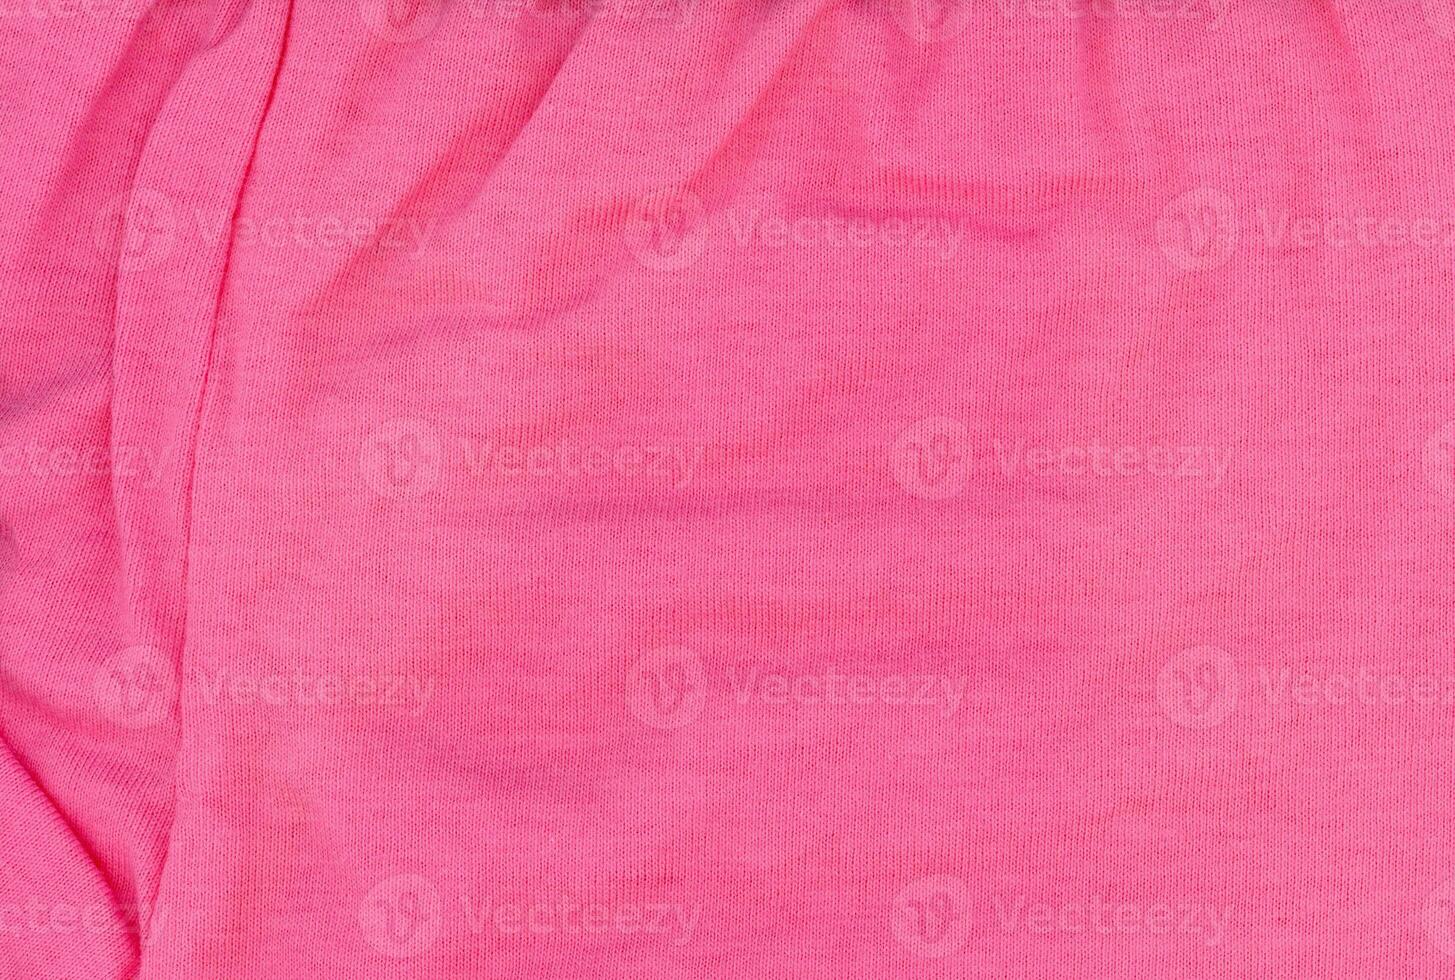 rippled pink fabric texture background photo